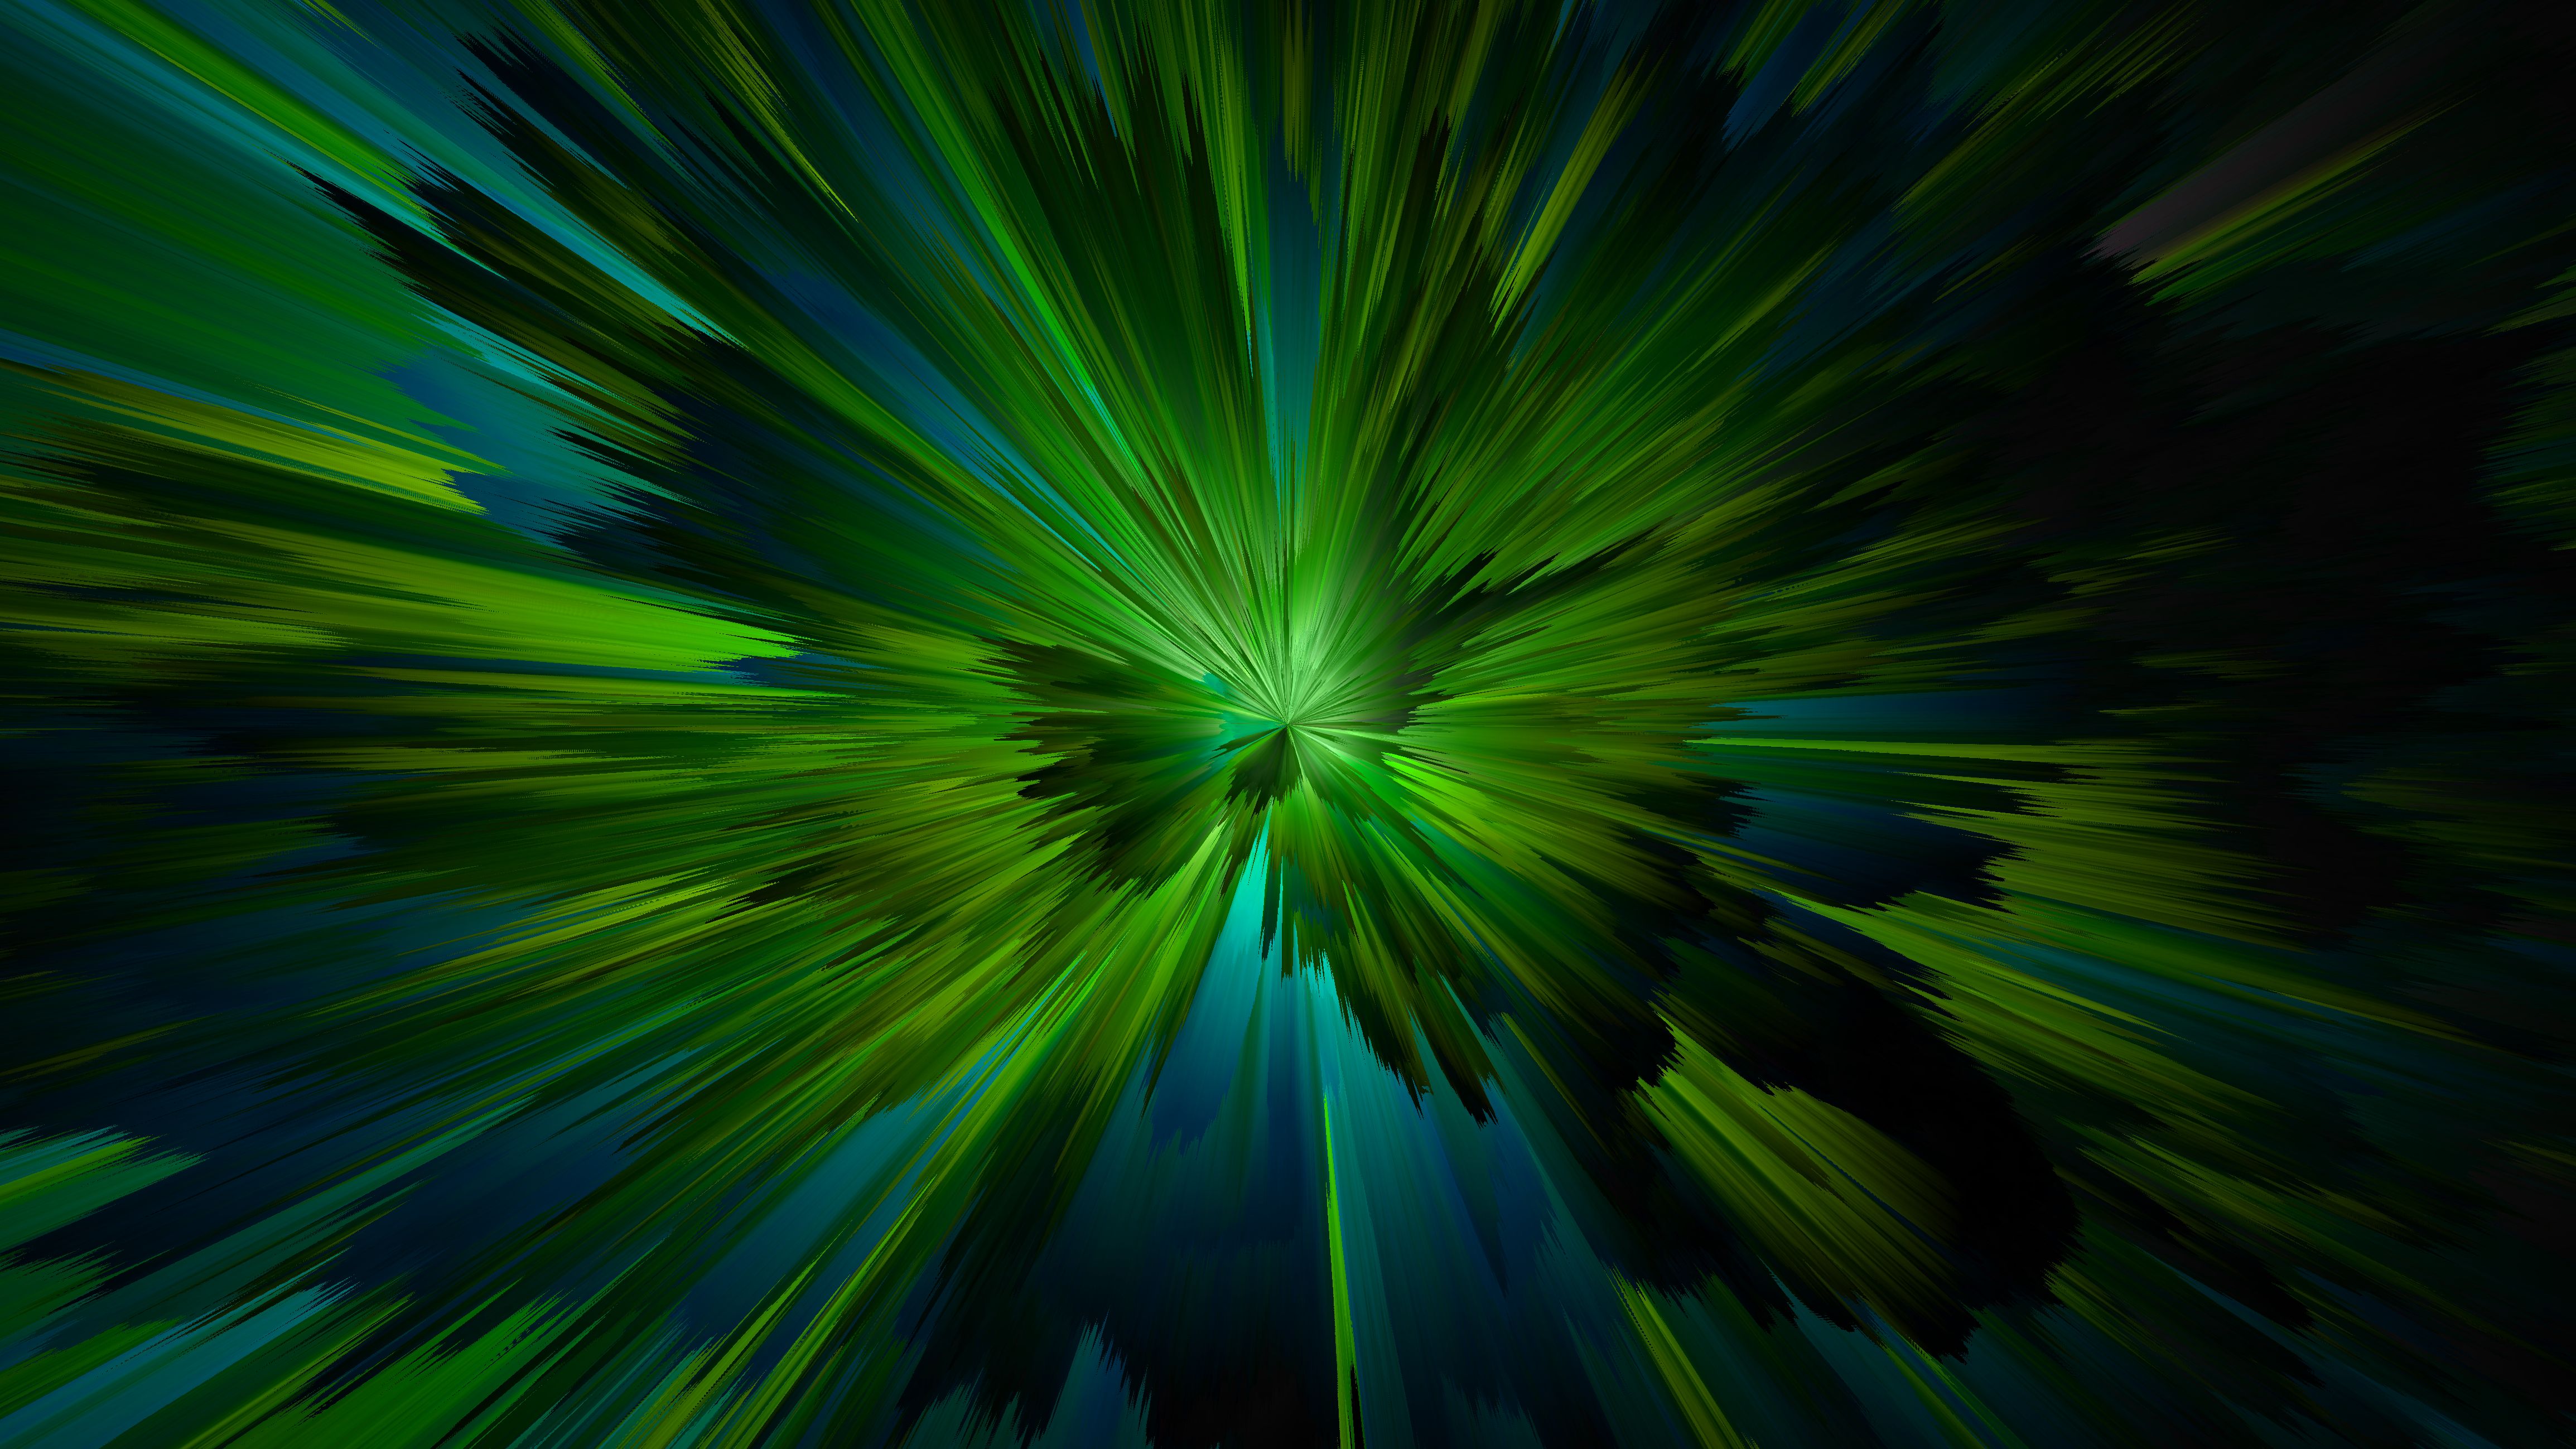 beams, rays, abstract, streaks, lines, stripes, green Full HD